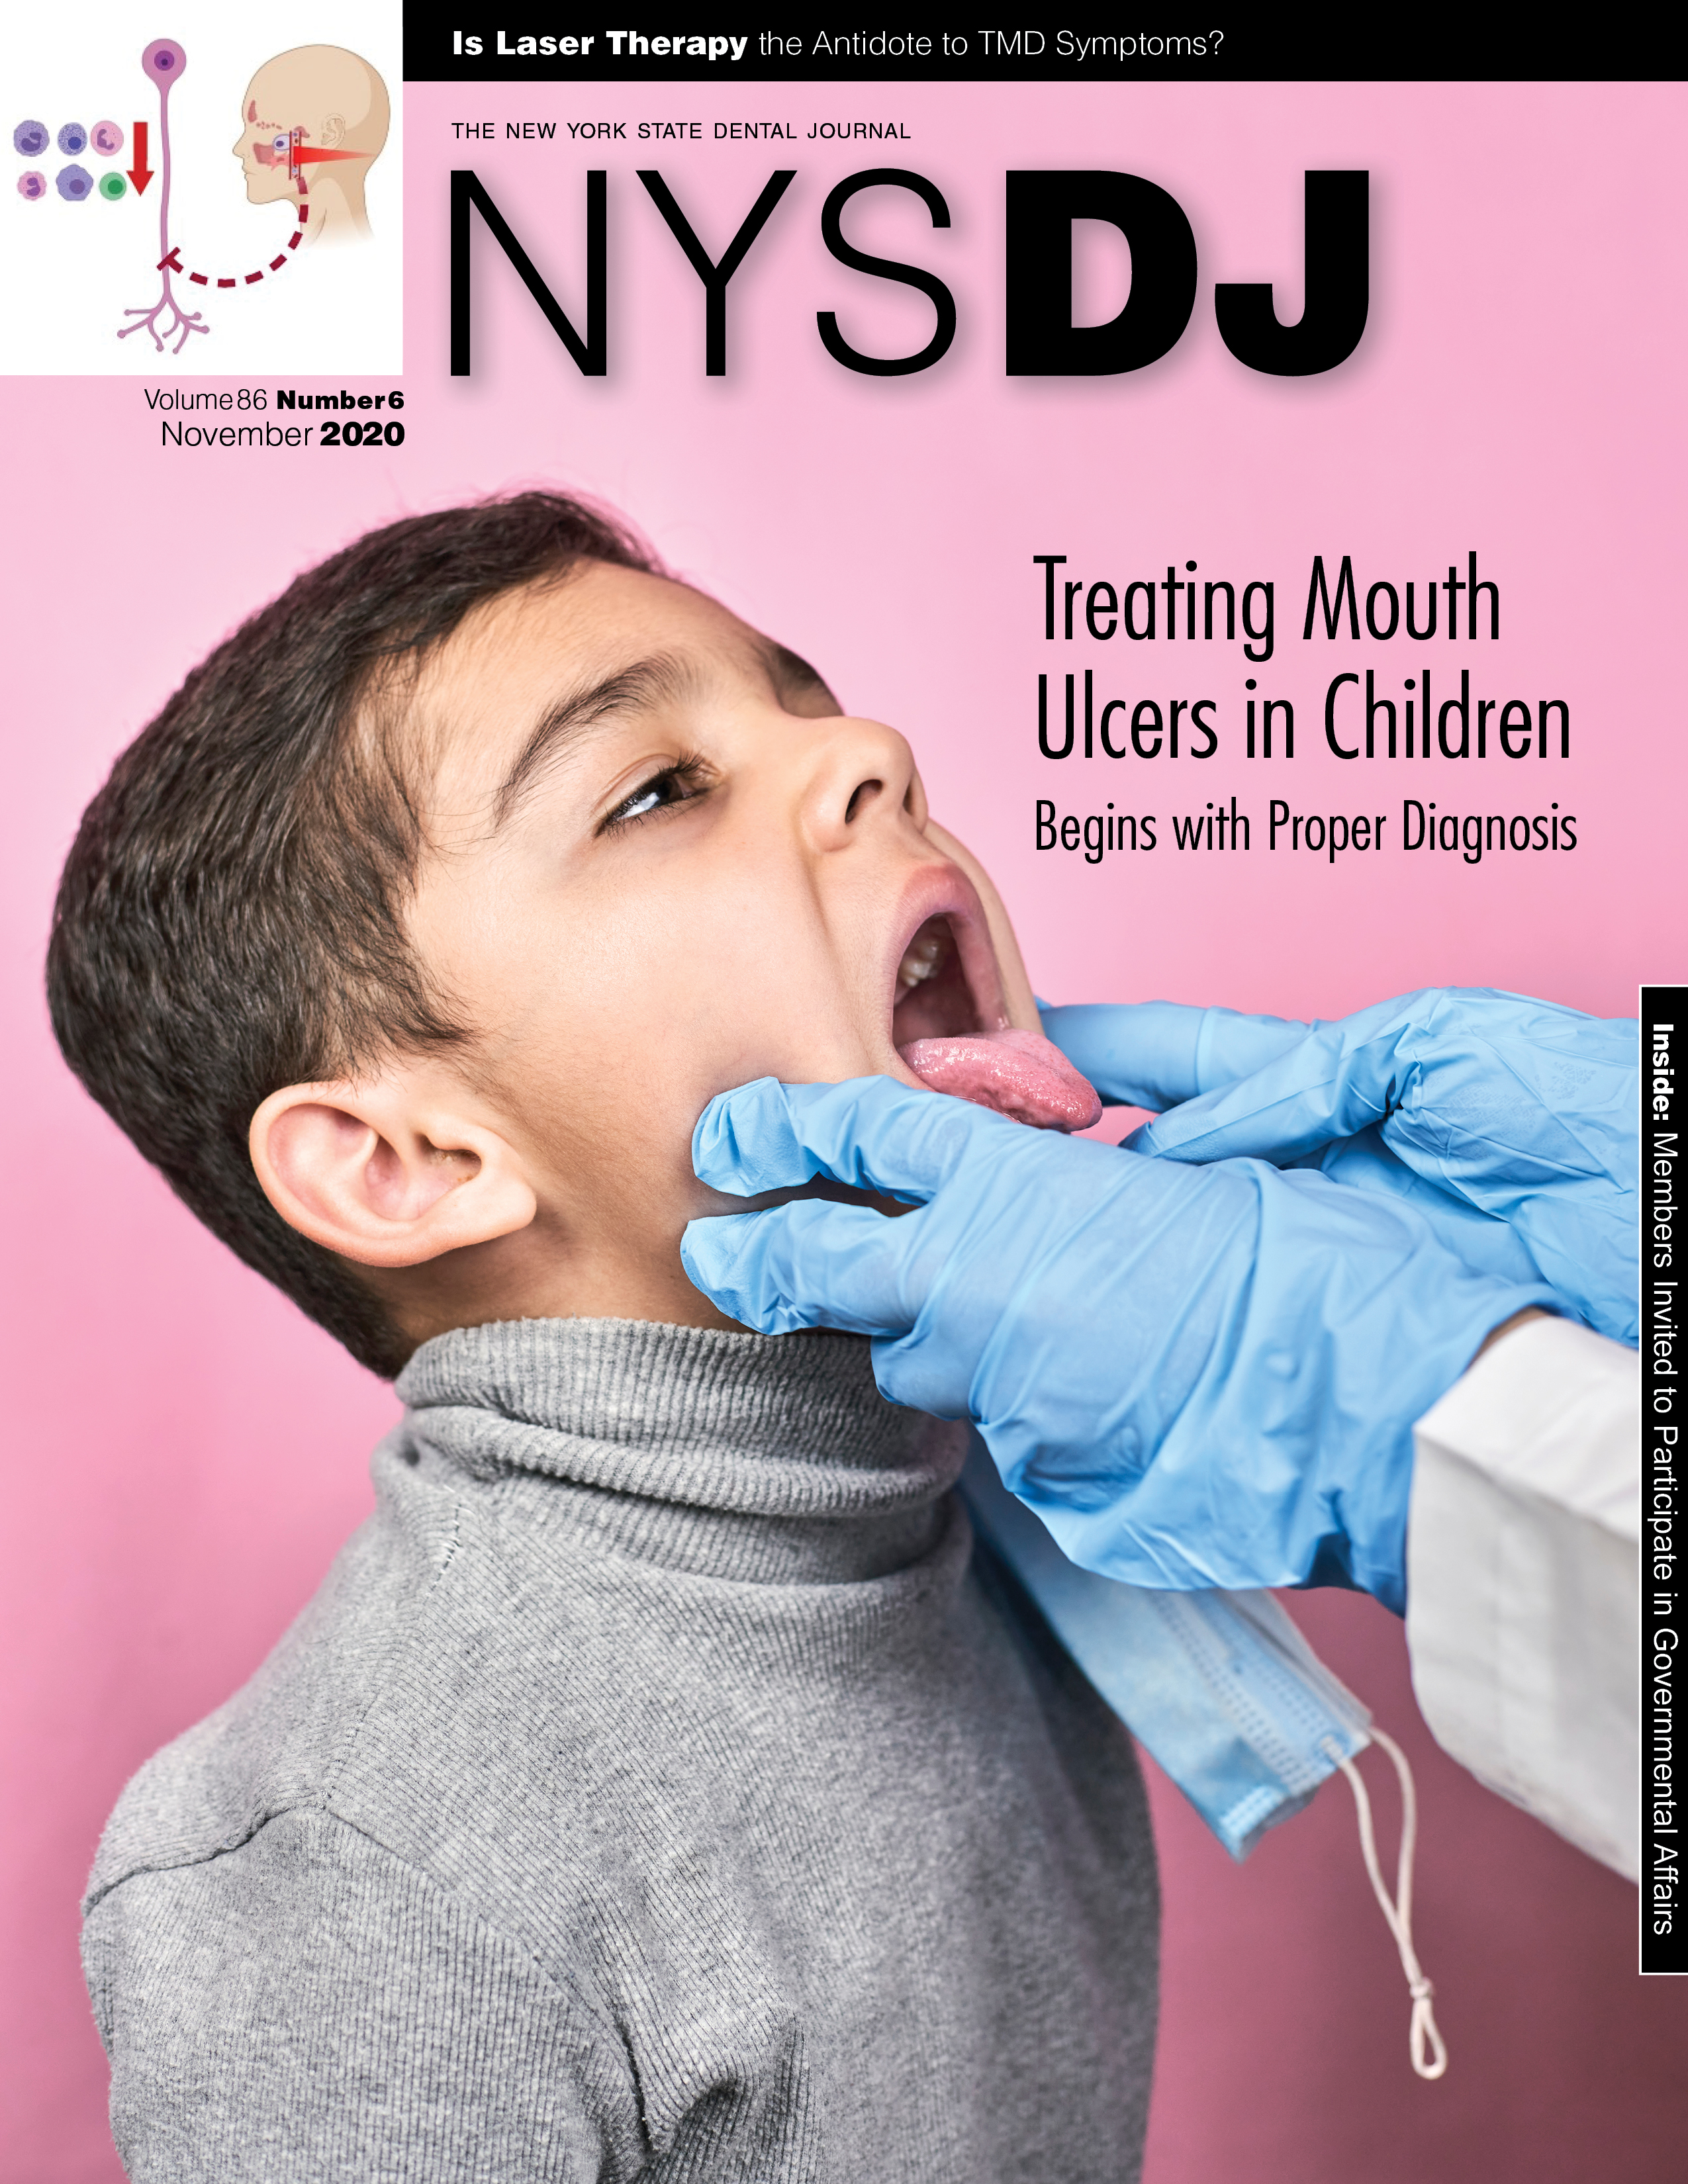 Cover of the NYSDJ with a child sticking out their tongue while gloved hands hold their jaw